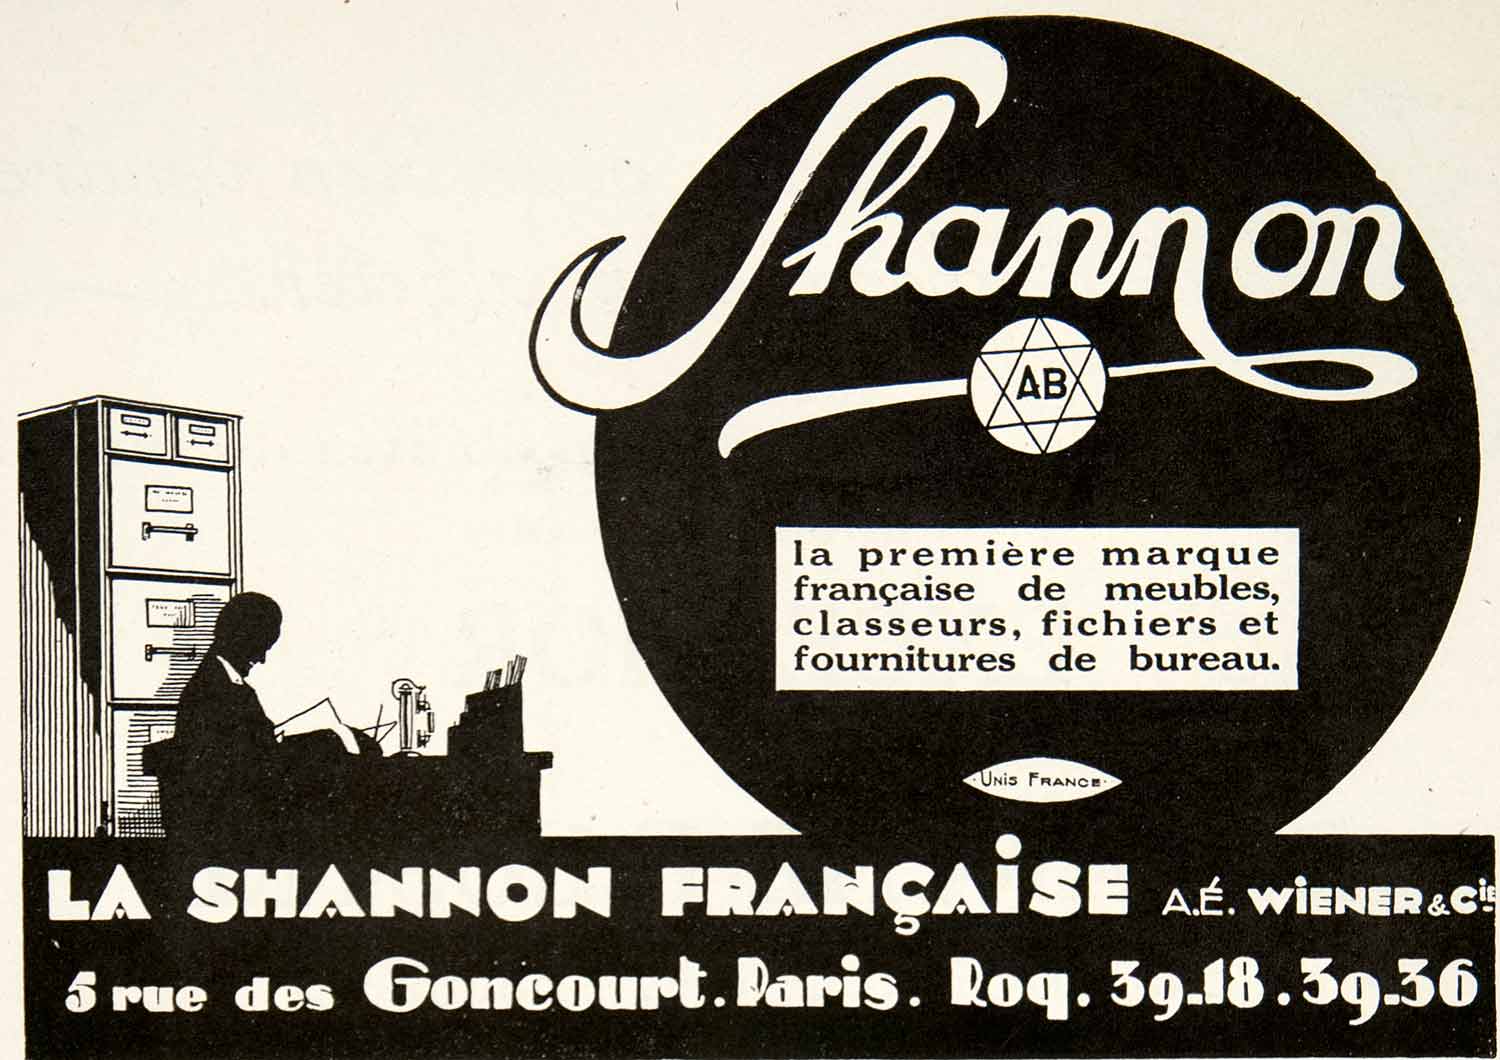 1928 Ad Vintage French La Shannon Francaise Office Furniture Supplies Files VEN5